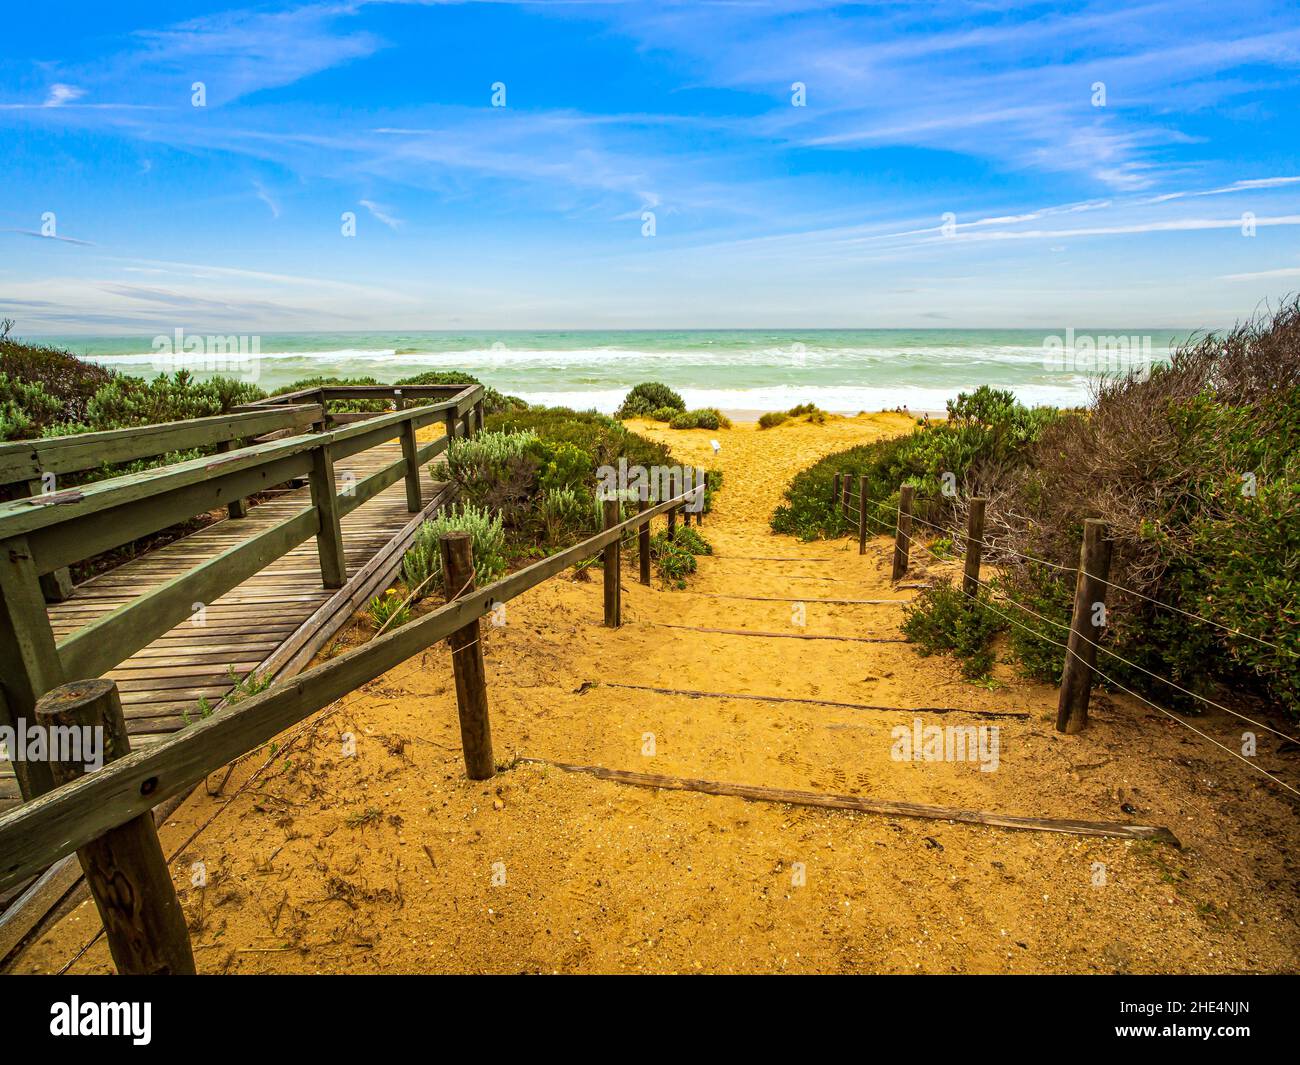 View of a clean and quiet beach with clear sky, no people. Entrance to the Ninety Mile Beach in Victoria, Australia. Stock Photo